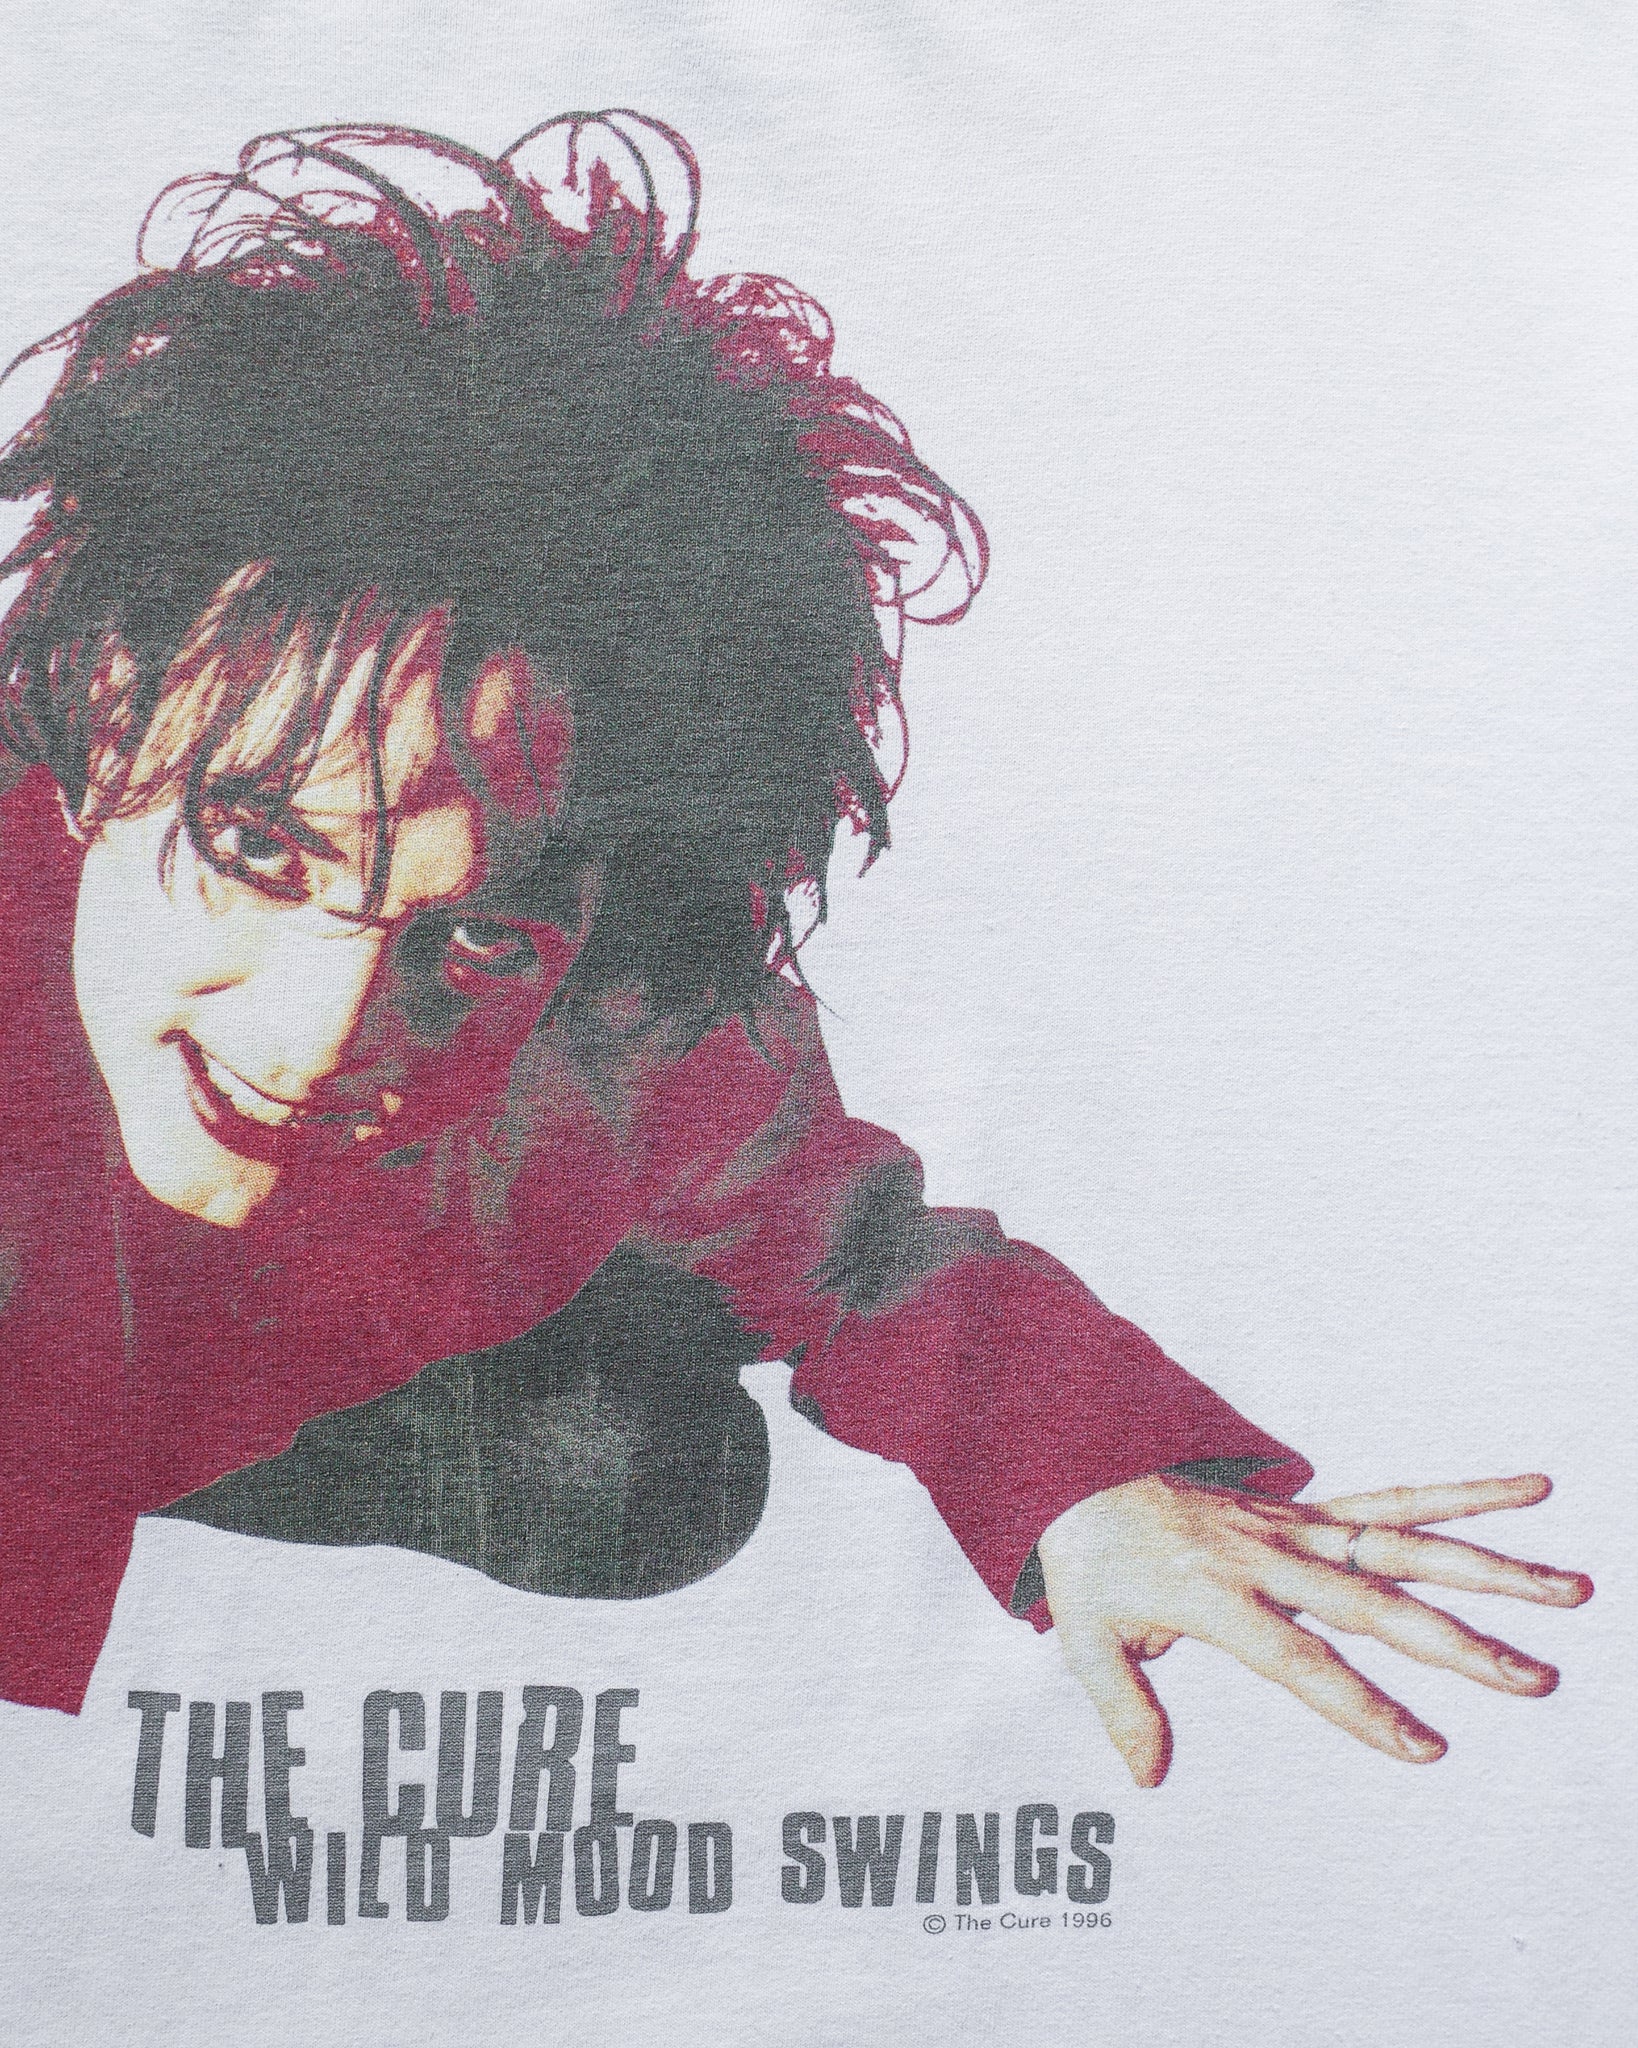 1996 The Cure Tour Tee